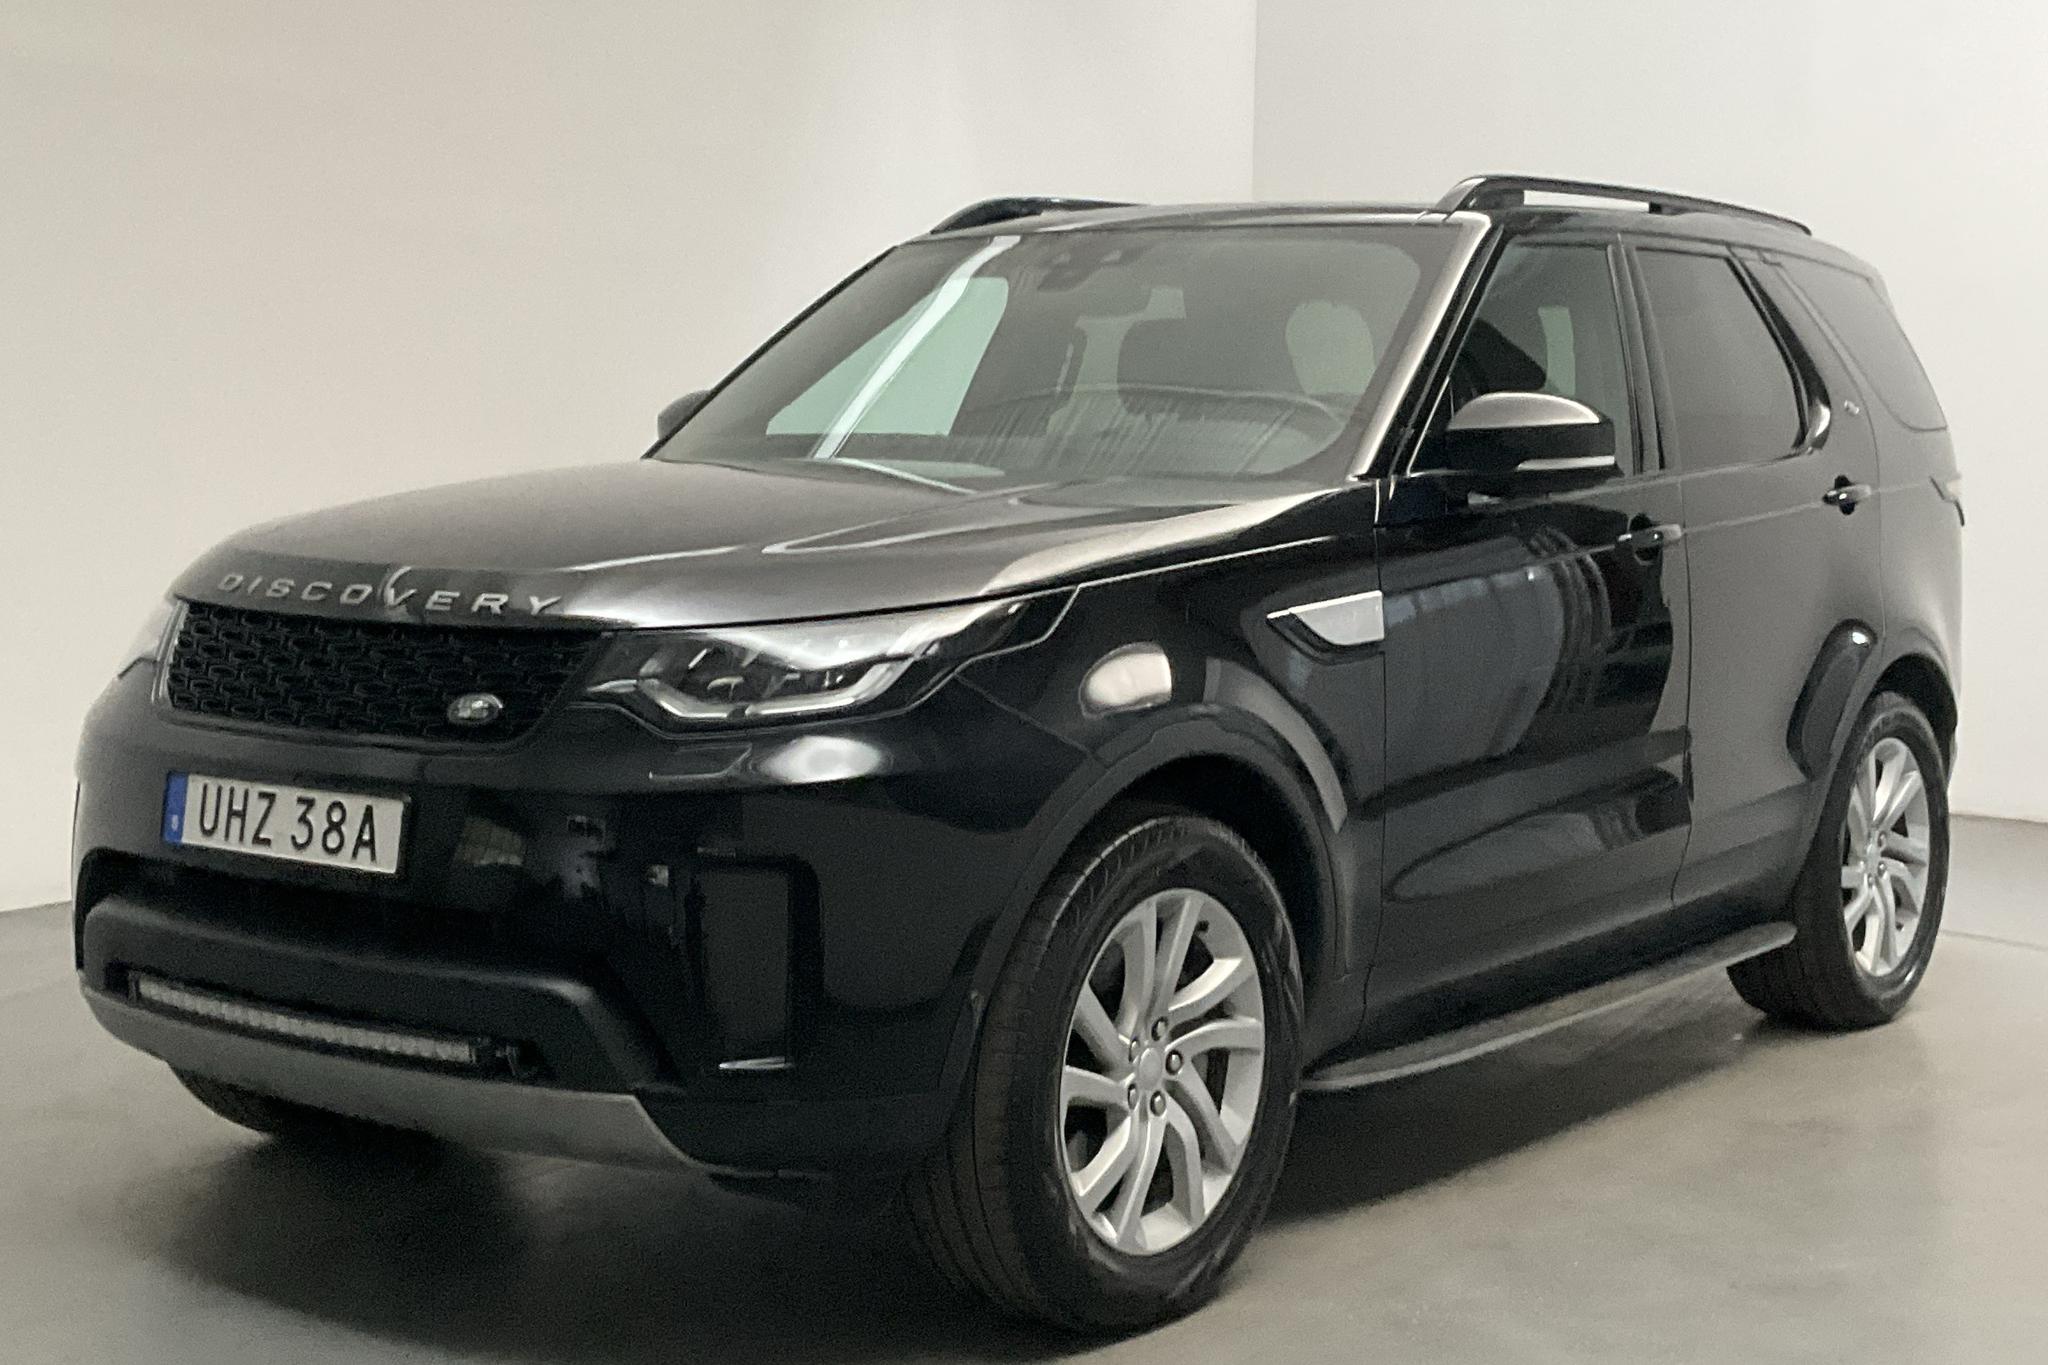 Land Rover Discovery 3.0L Diesel (306hk) - 160 740 km - Automatic - black - 2020